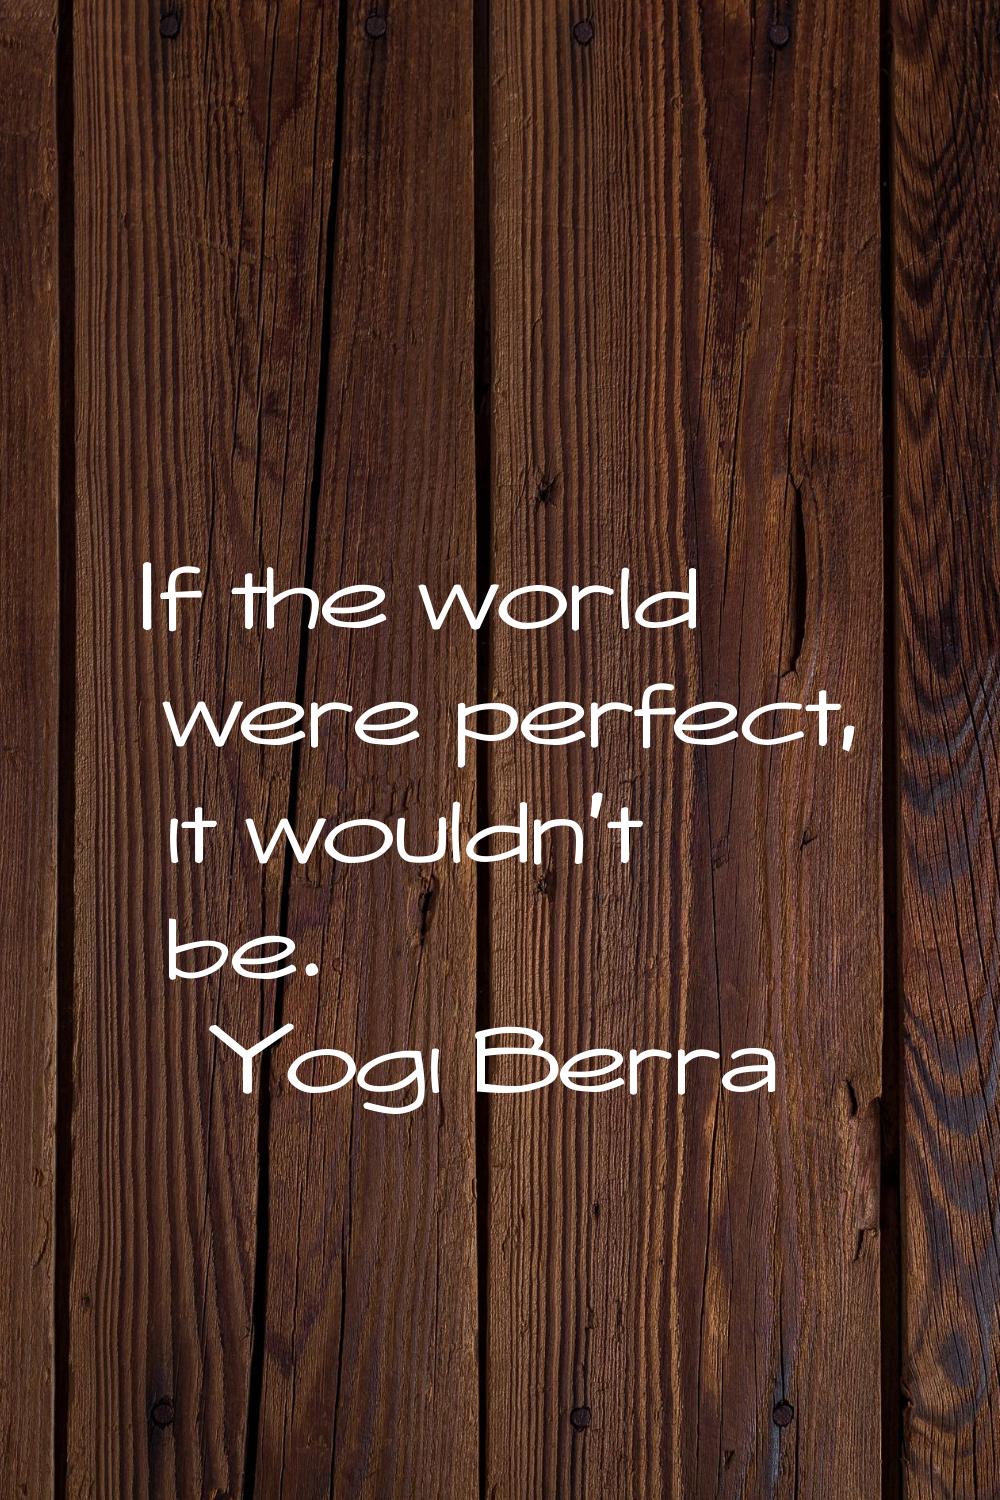 If the world were perfect, it wouldn't be.